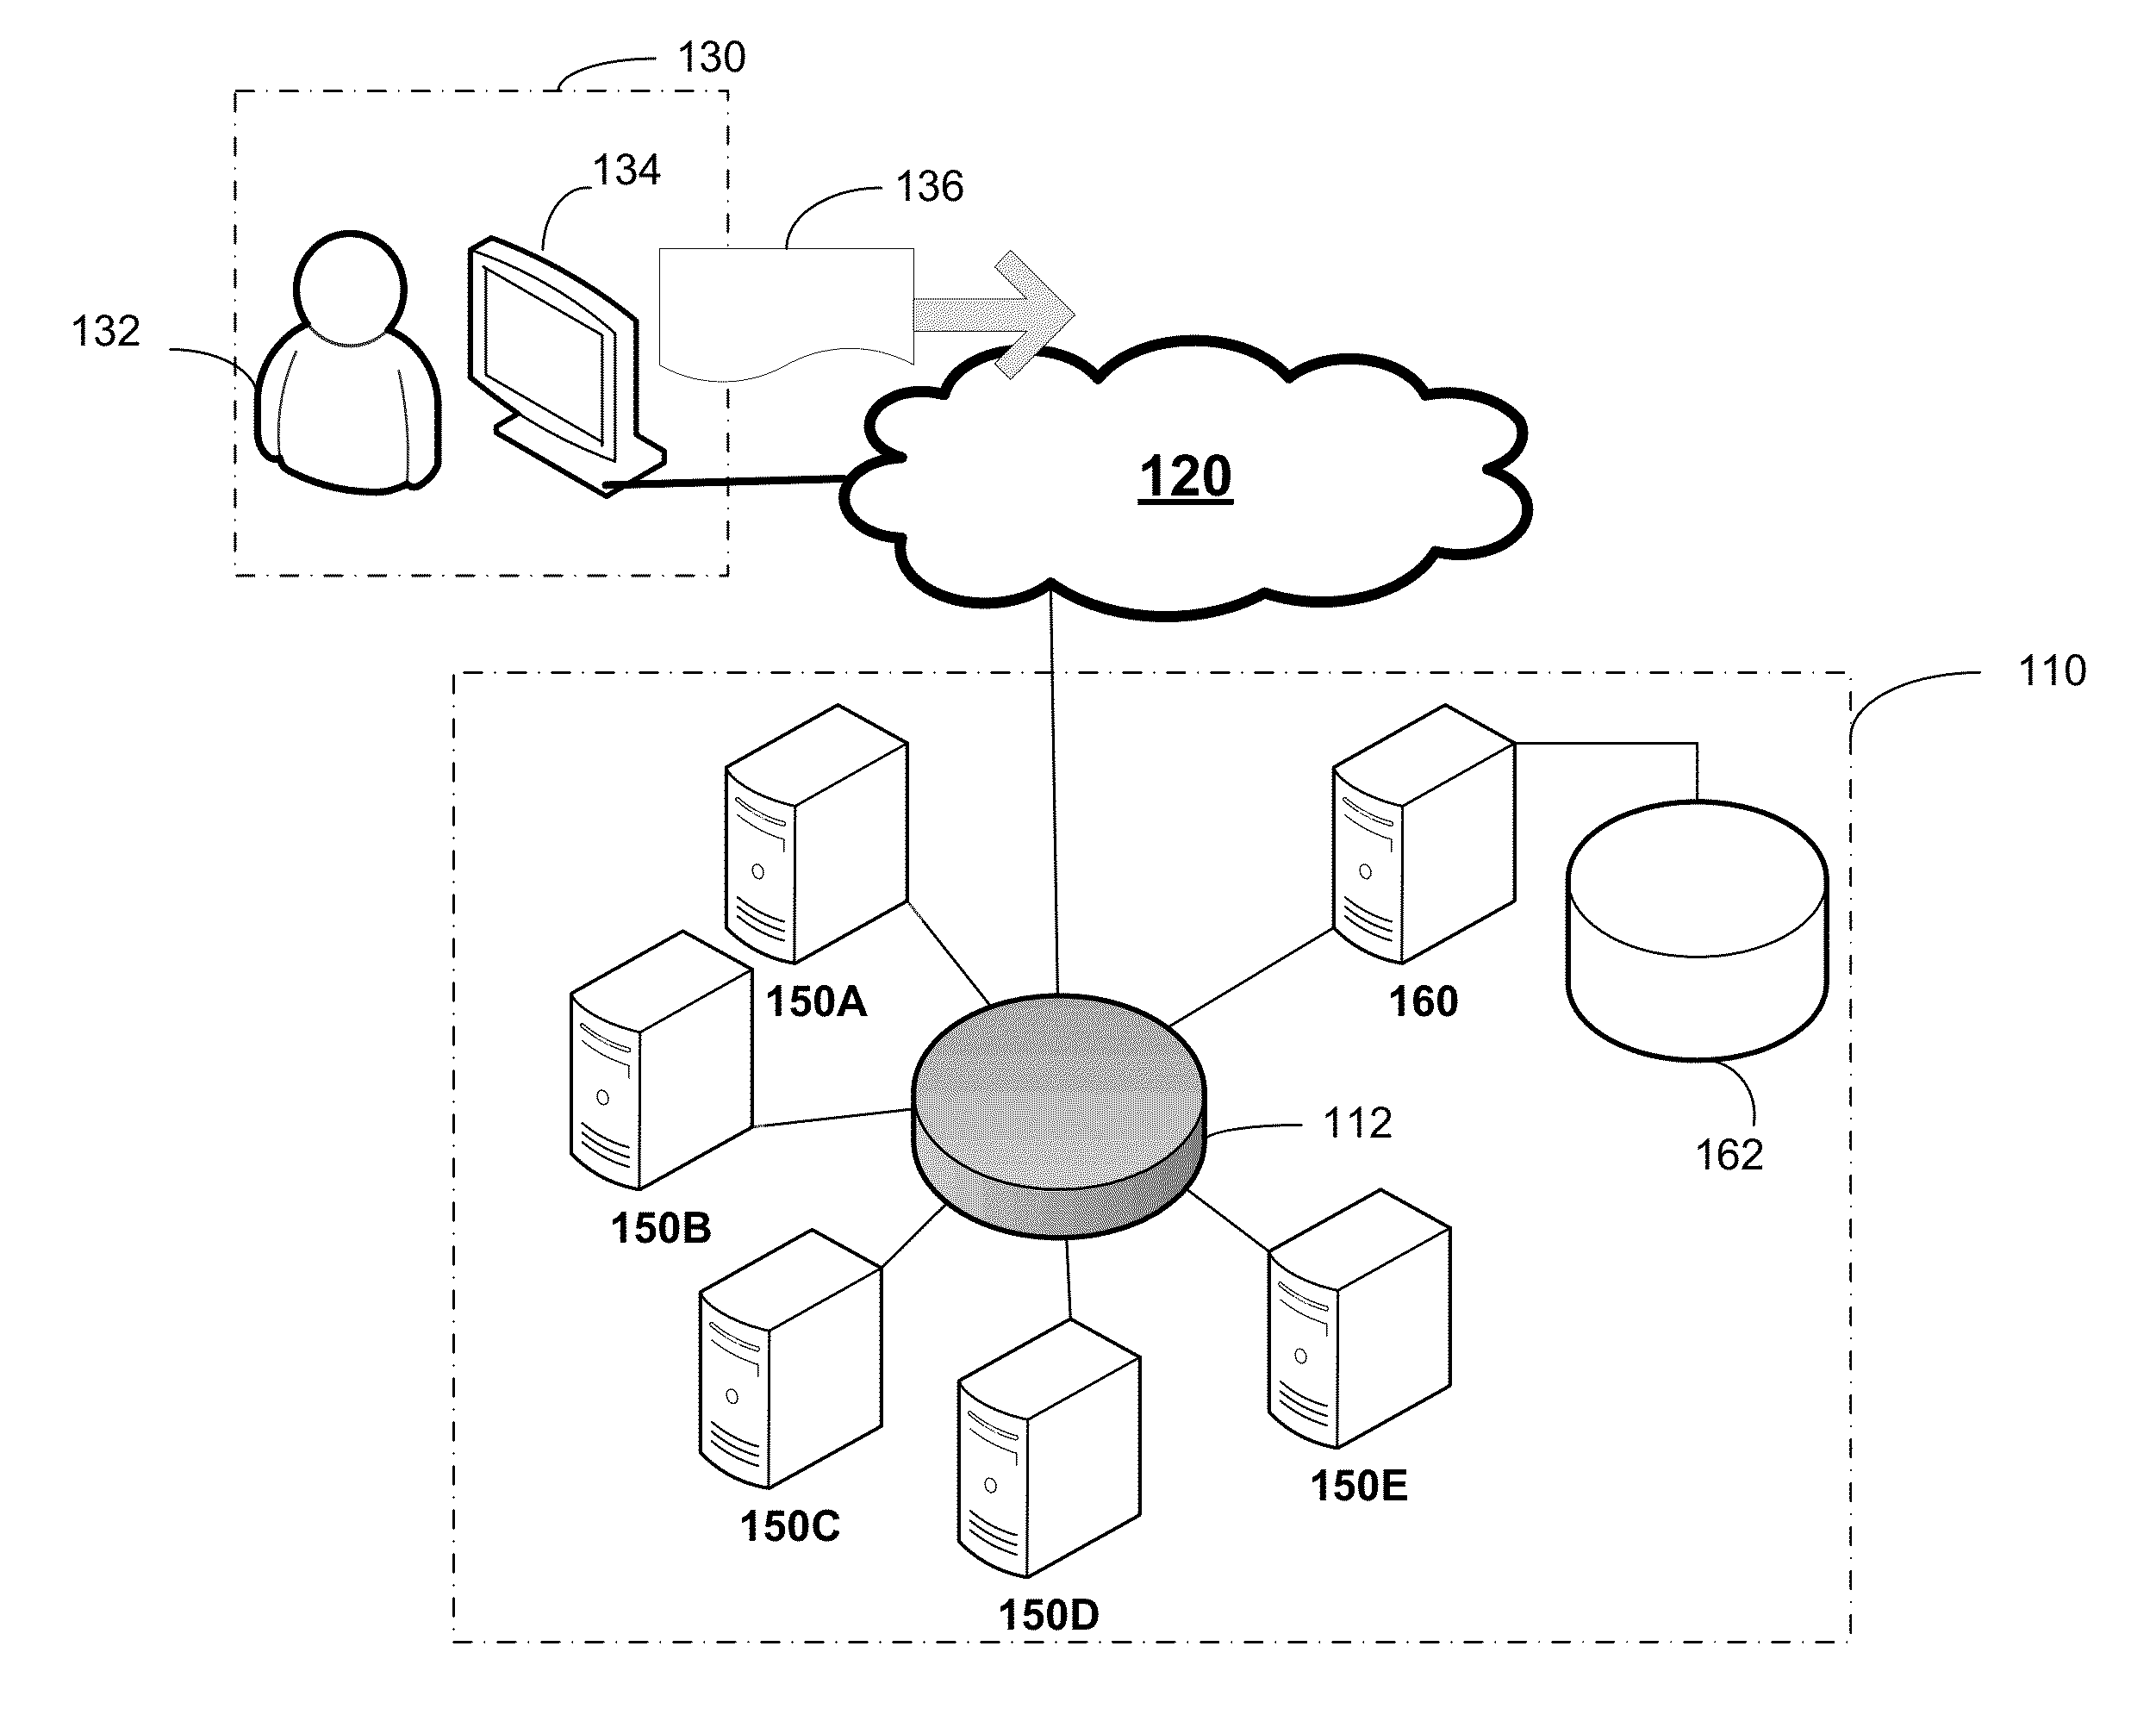 Computing cluster with latency control